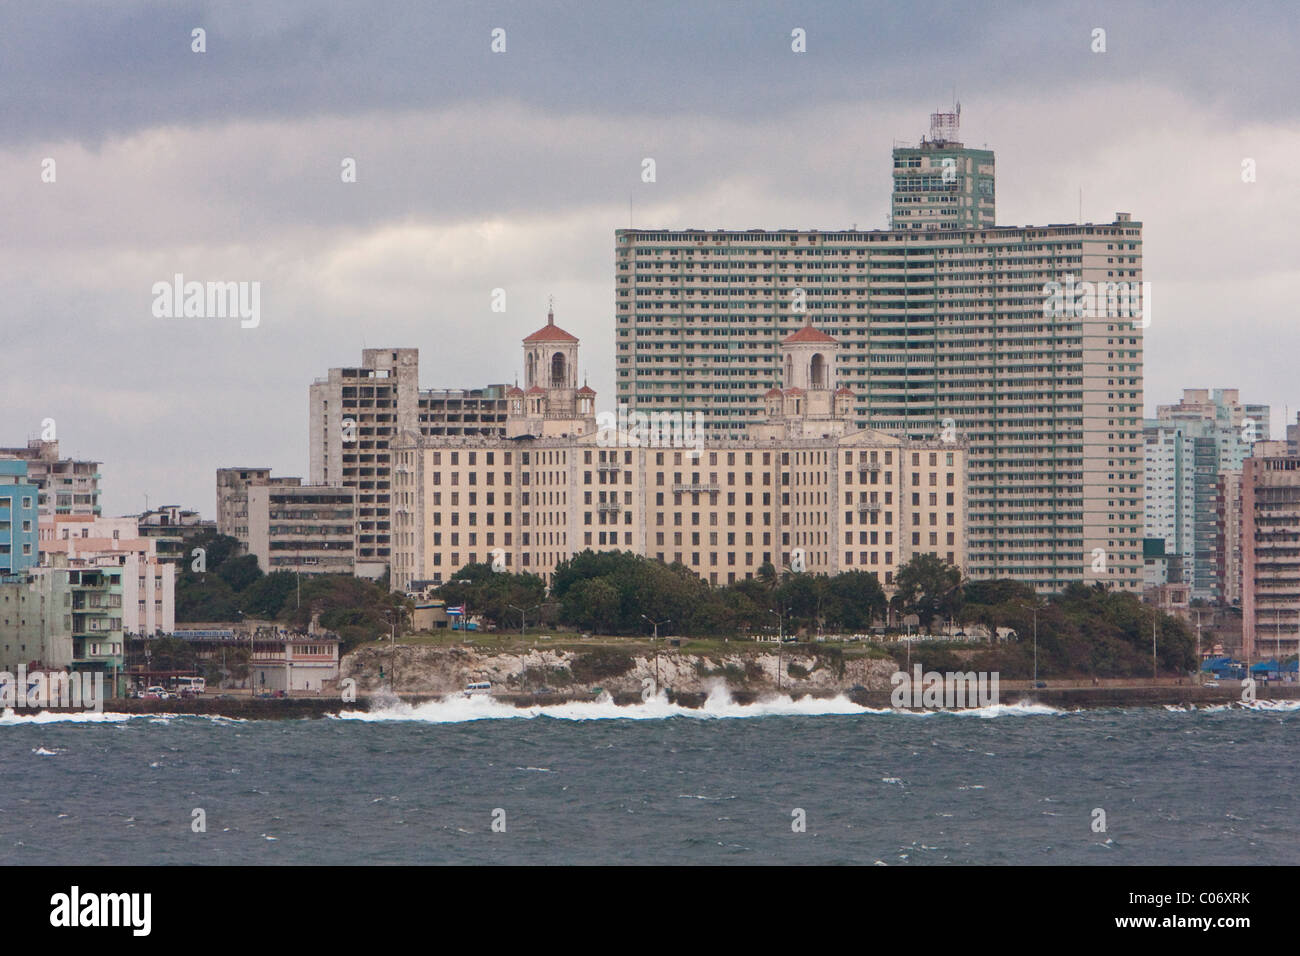 Cuba, Havana. Hotel Nacional (with trees in front) Viewed from El Morro Fortress.  Edificio Focsa, taller building behind the hotel. Stock Photo